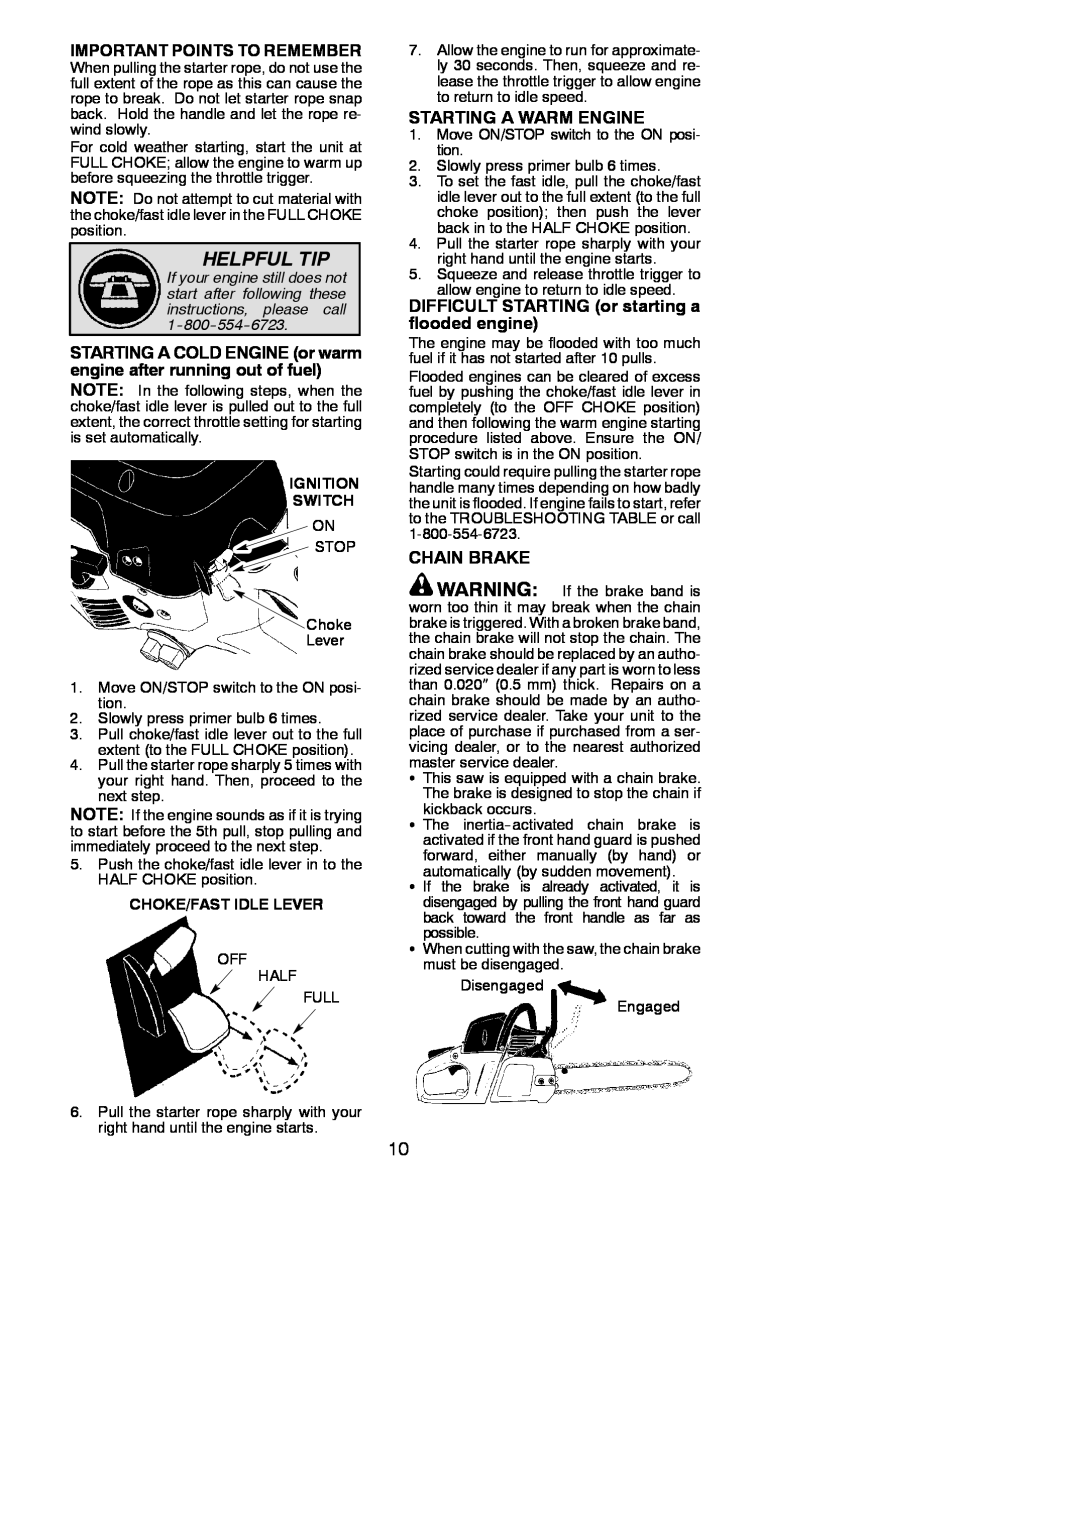 Poulan 952802030 Helpful Tip, Important Points To Remember, Starting A Warm Engine, Chain Brake, Ignition Switch 